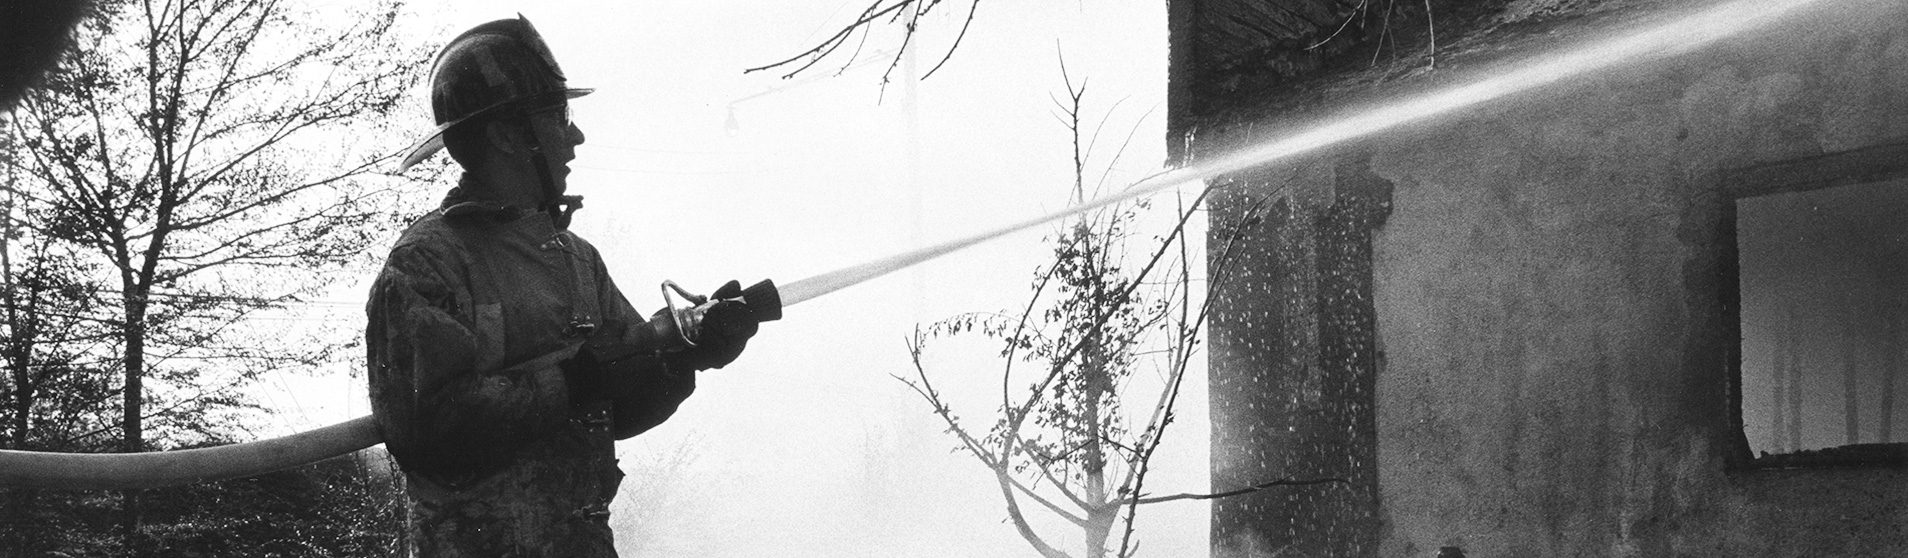 Black and white photo of a Greeley firefighter battling a burning building with a fire hose